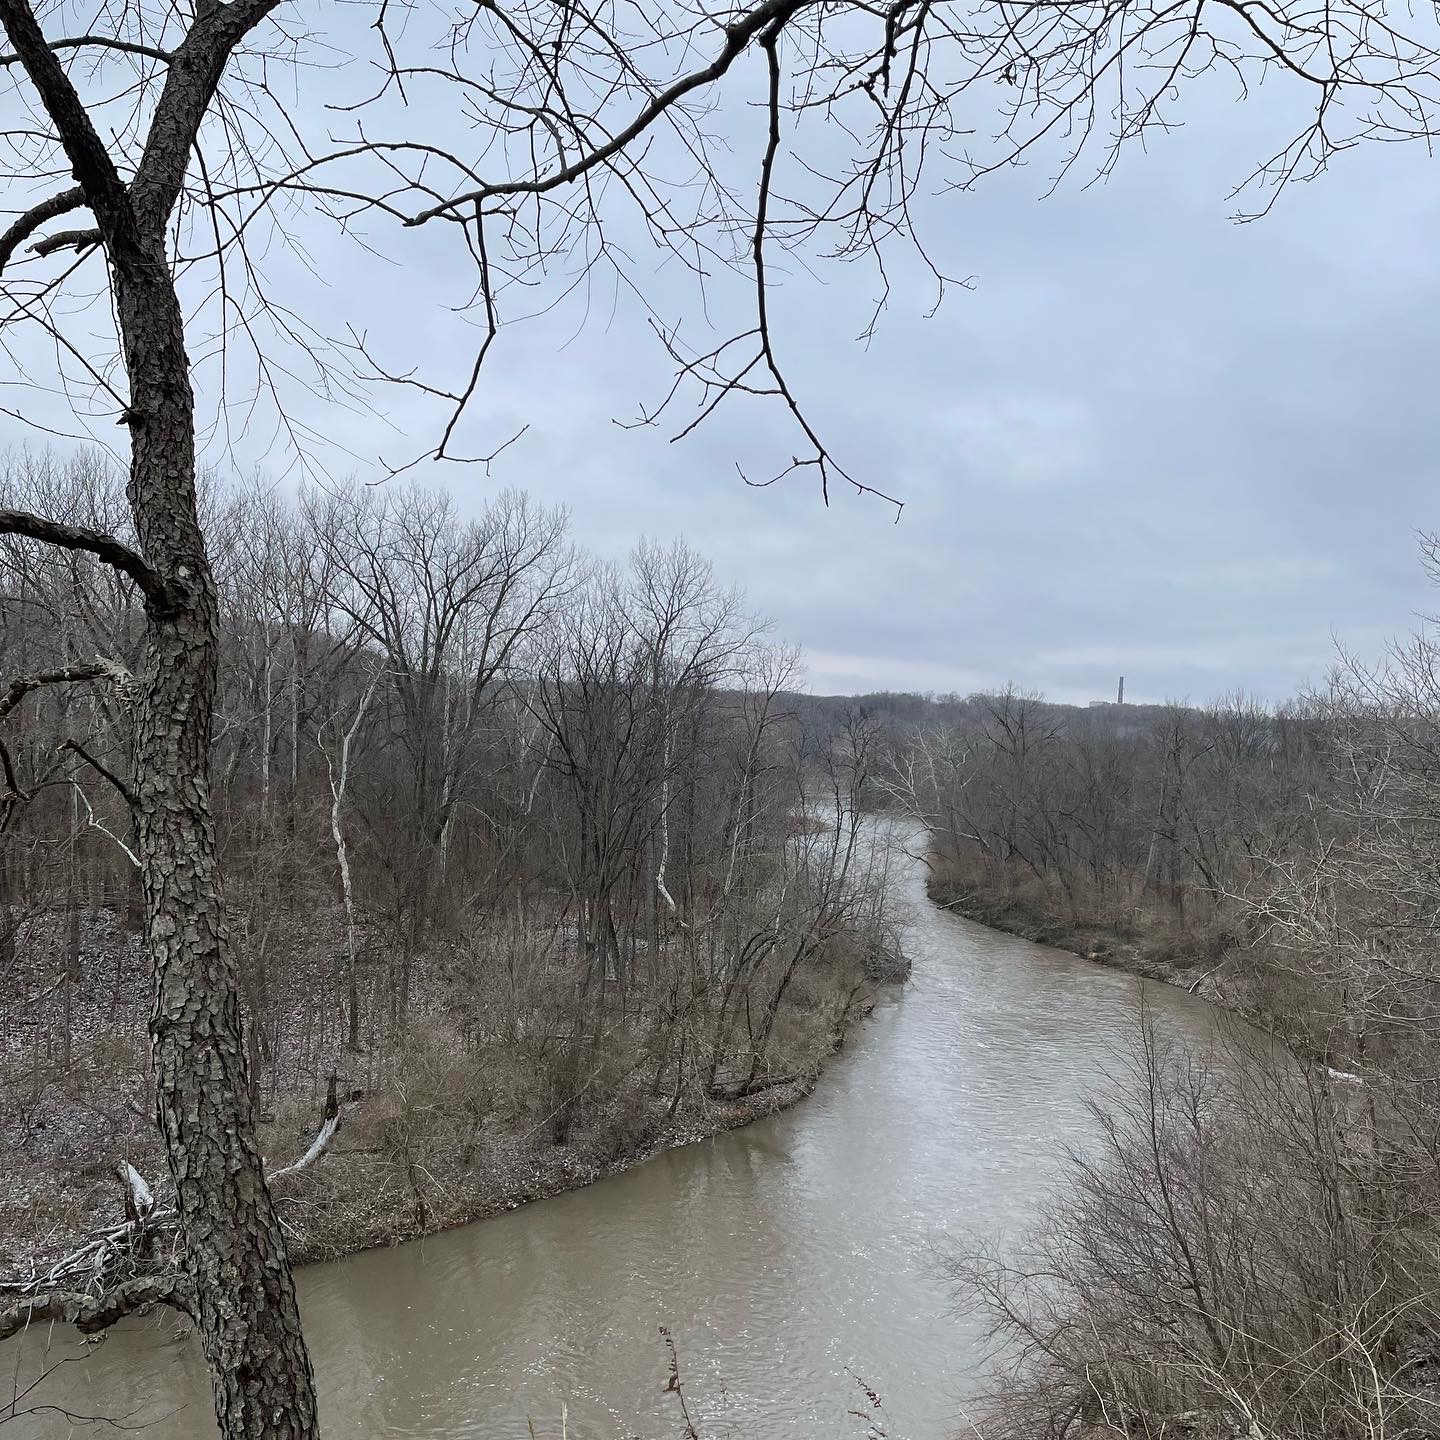 View overlooking the Vermillion River. There is a tree trunk and branches in the foreground. Colors are browns and greens with a grey sky in the background. Photo by Mara Thacker.